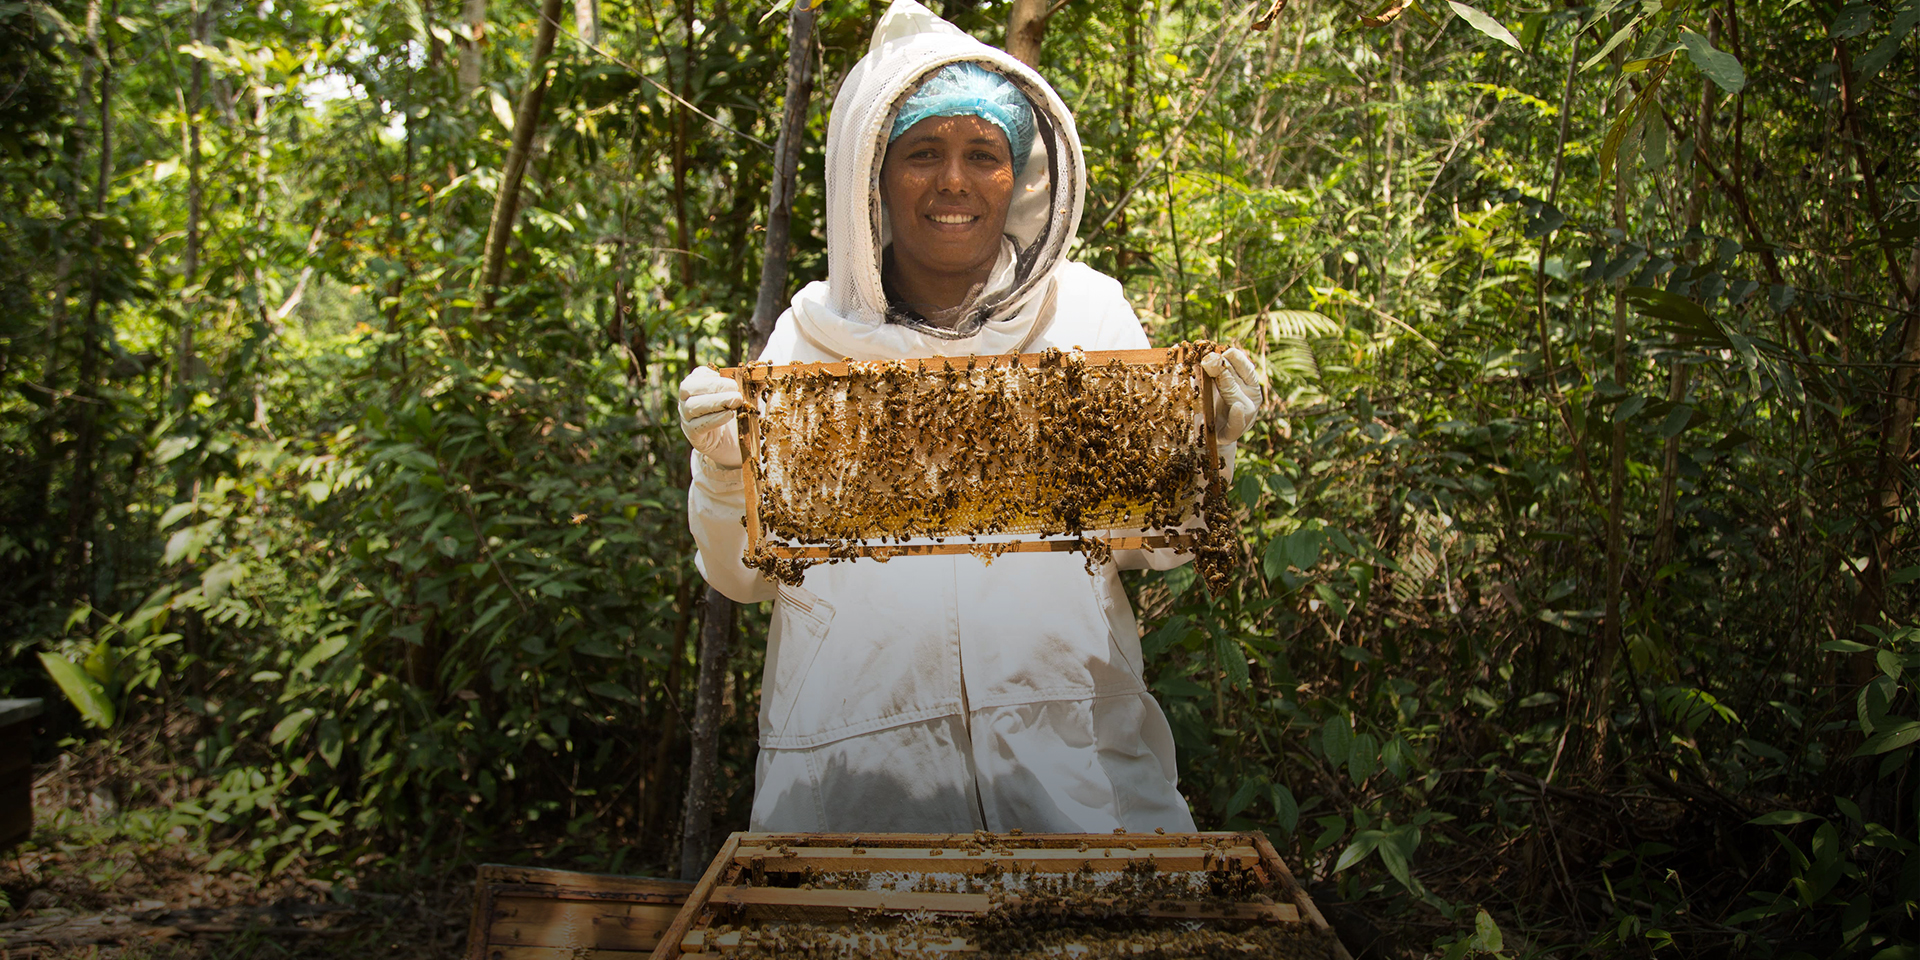 A beekeeper holding up a frame covered in bees that she has pulled from a bee box.